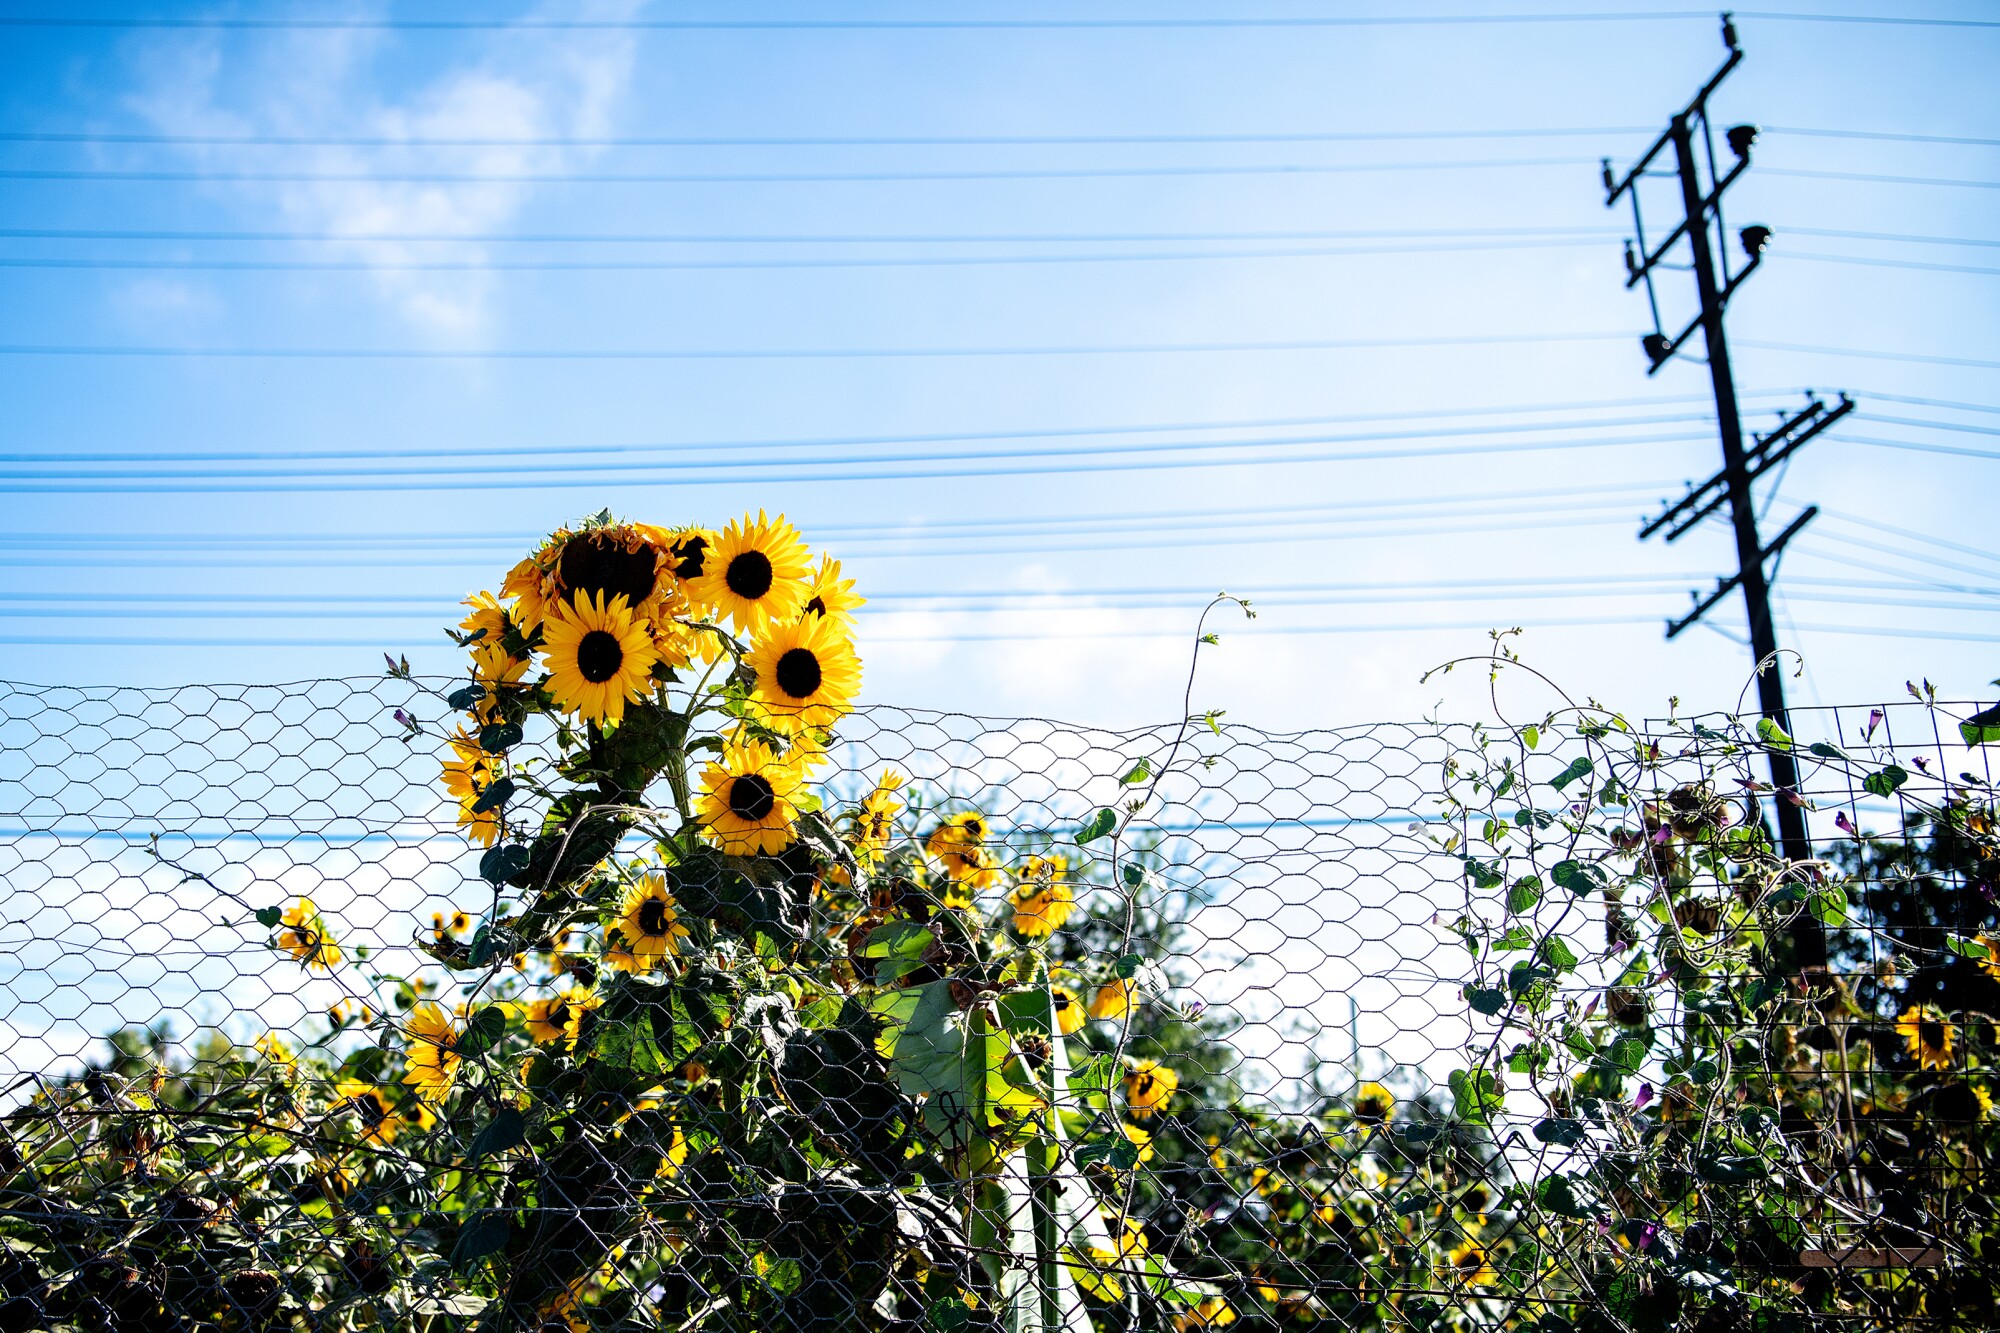 Sunflowers and vines line some metal fencing.